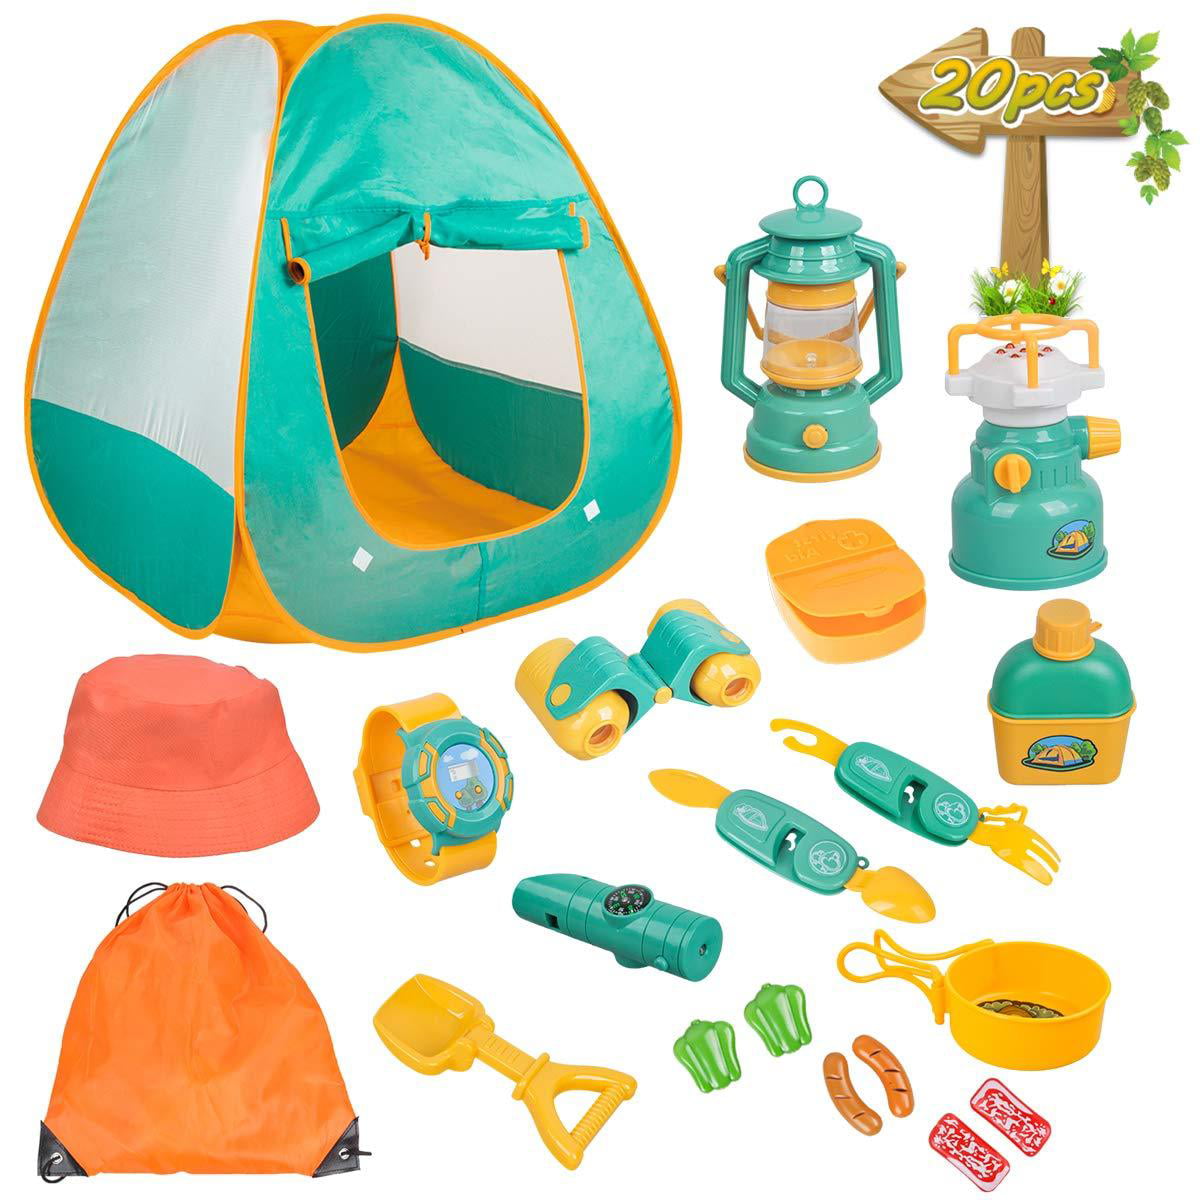 Meland Kids Camping Set with Tent 20pcs - Camping Gear Tool Pretend Play Set for Toddlers Kids Boys Girls Outdoor Toy Birthday Gift